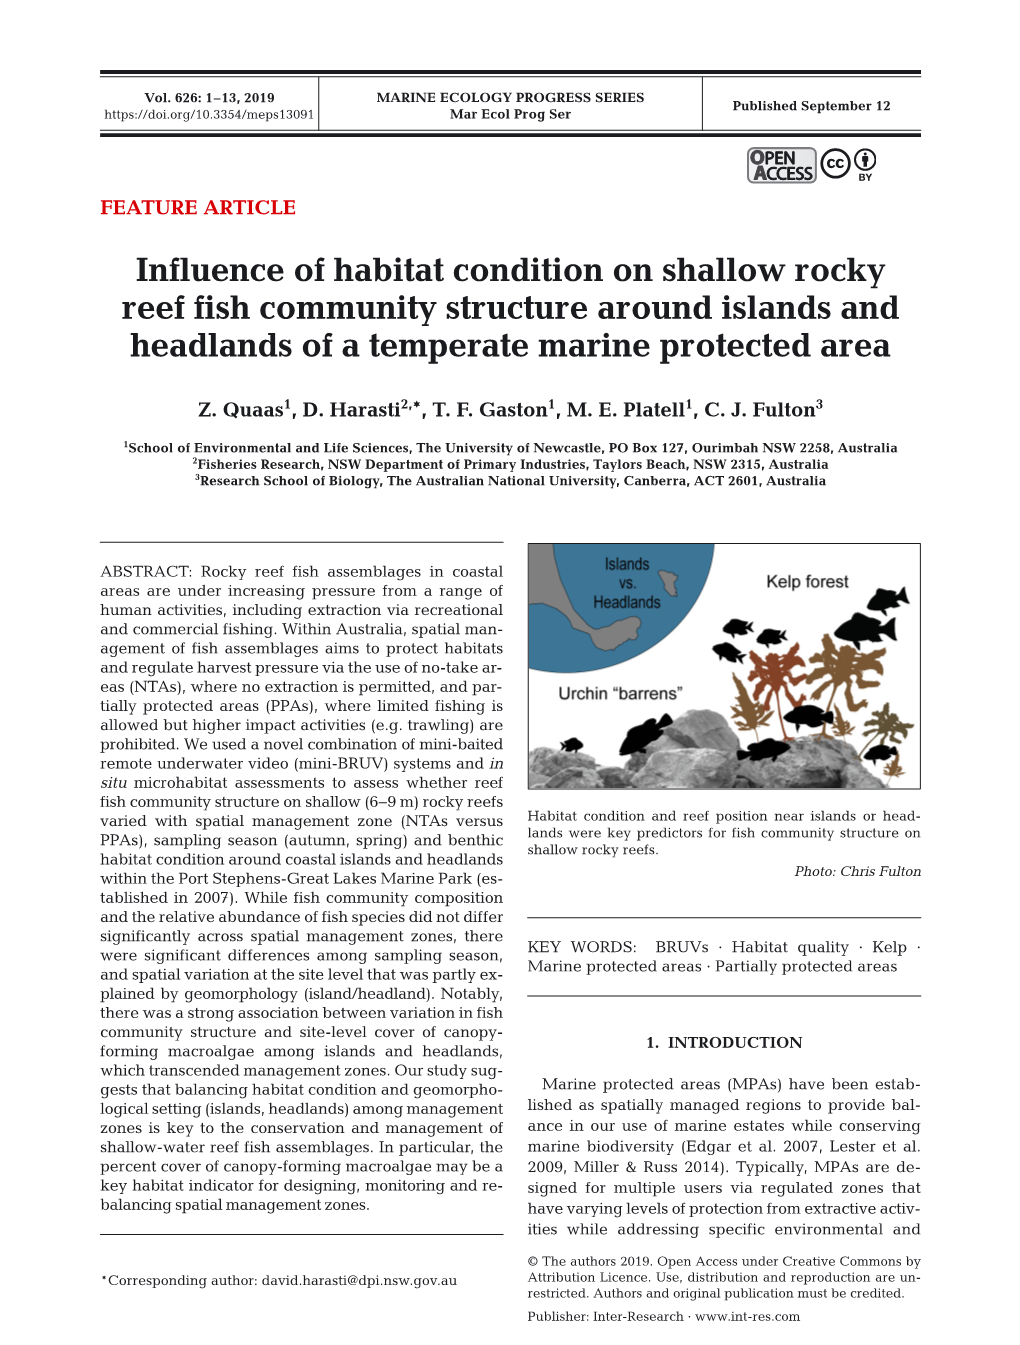 Influence of Habitat Condition on Shallow Rocky Reef Fish Community Structure Around Islands and Headlands of a Temperate Marine Protected Area